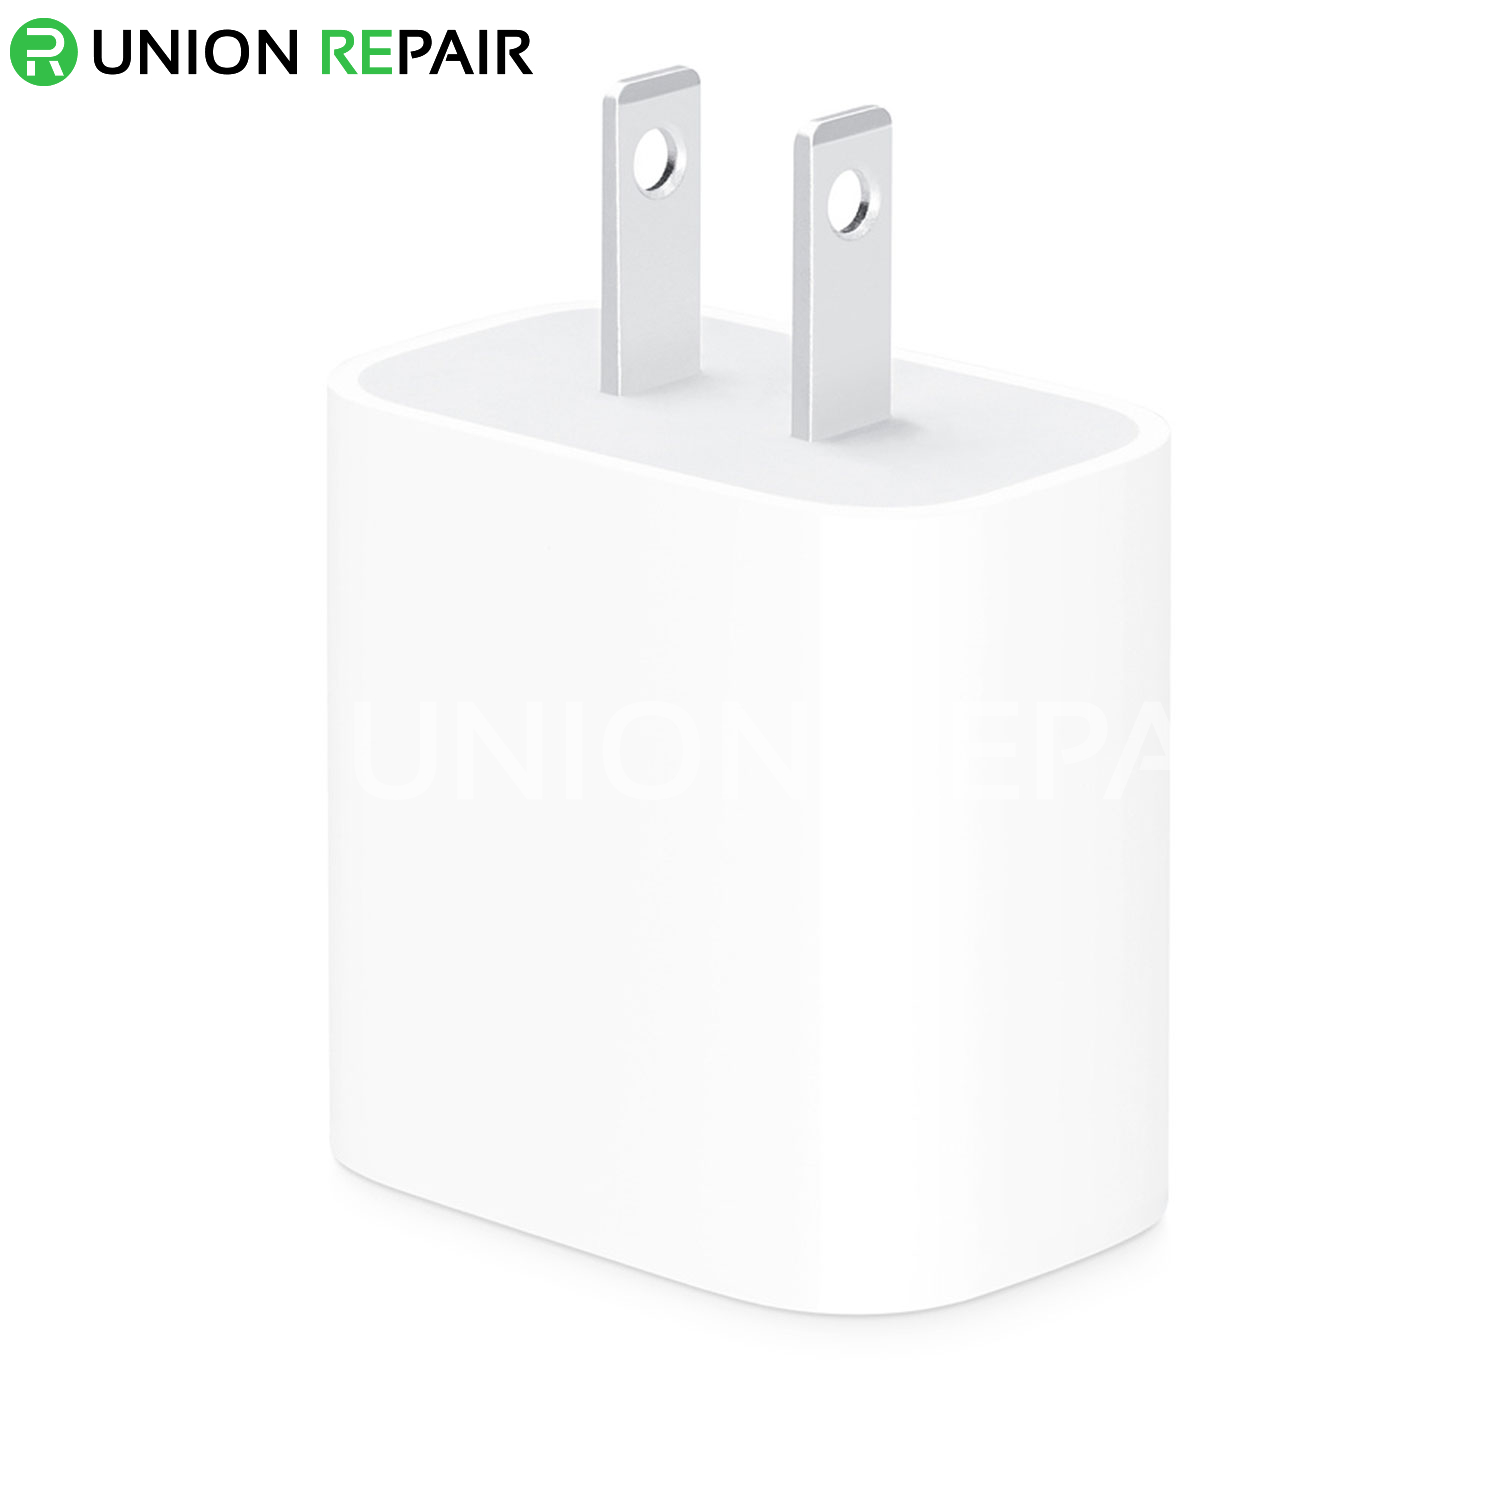 20W USB-C Power Adapter for iPhone - US Version